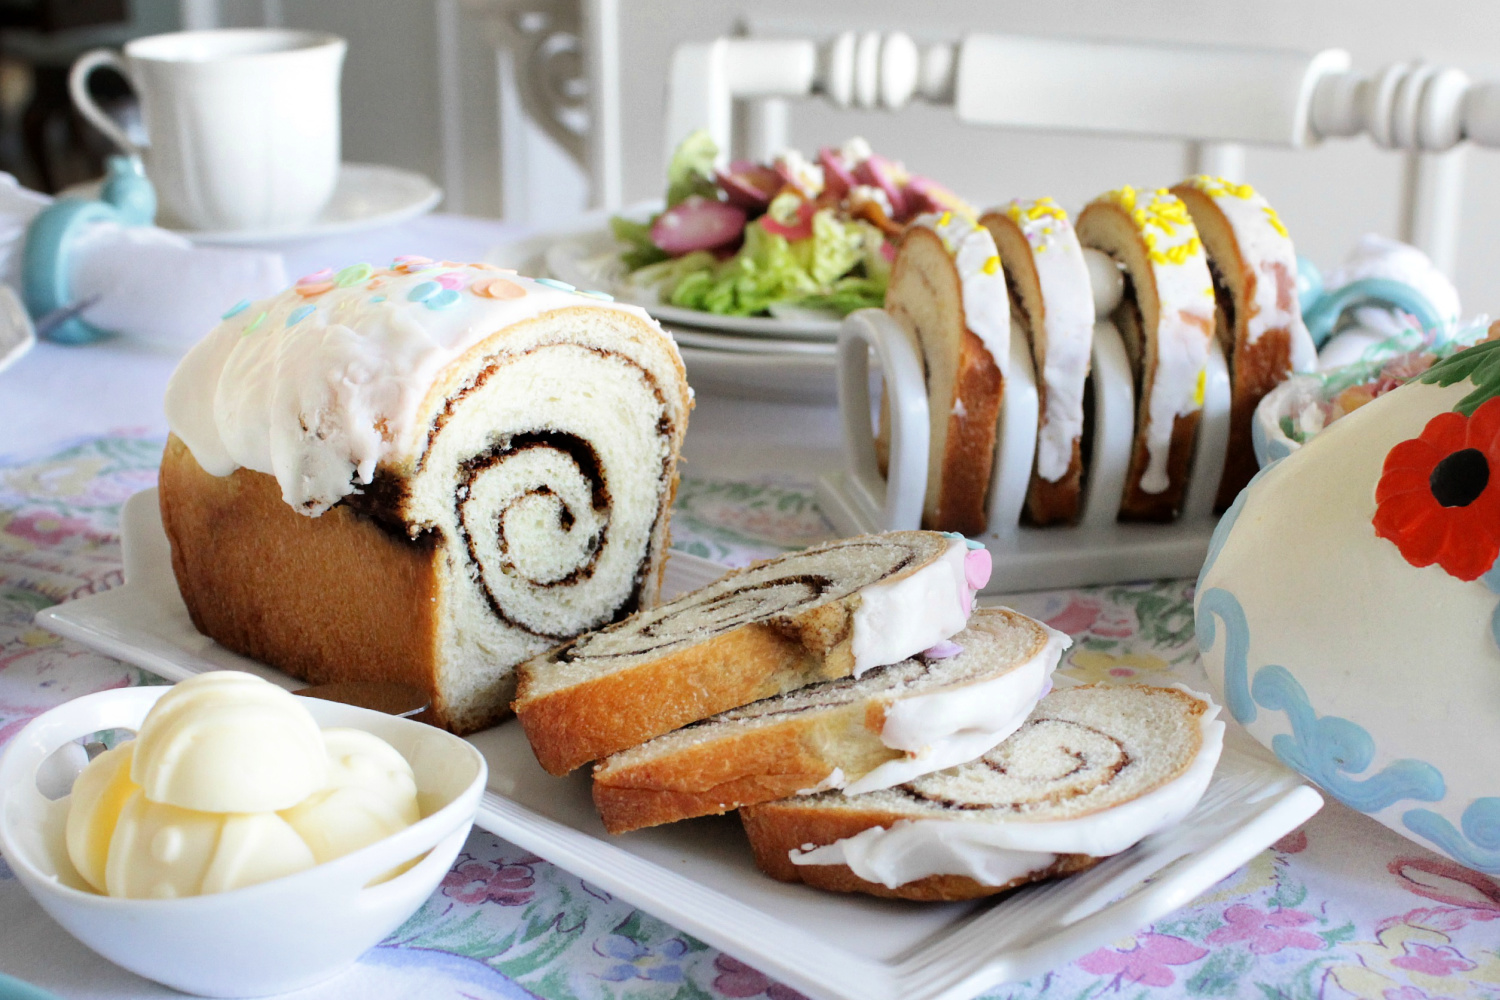 A vintage chic Easter dinner for two includes an easy recipe for mini cinnamon swirl bread loaves.